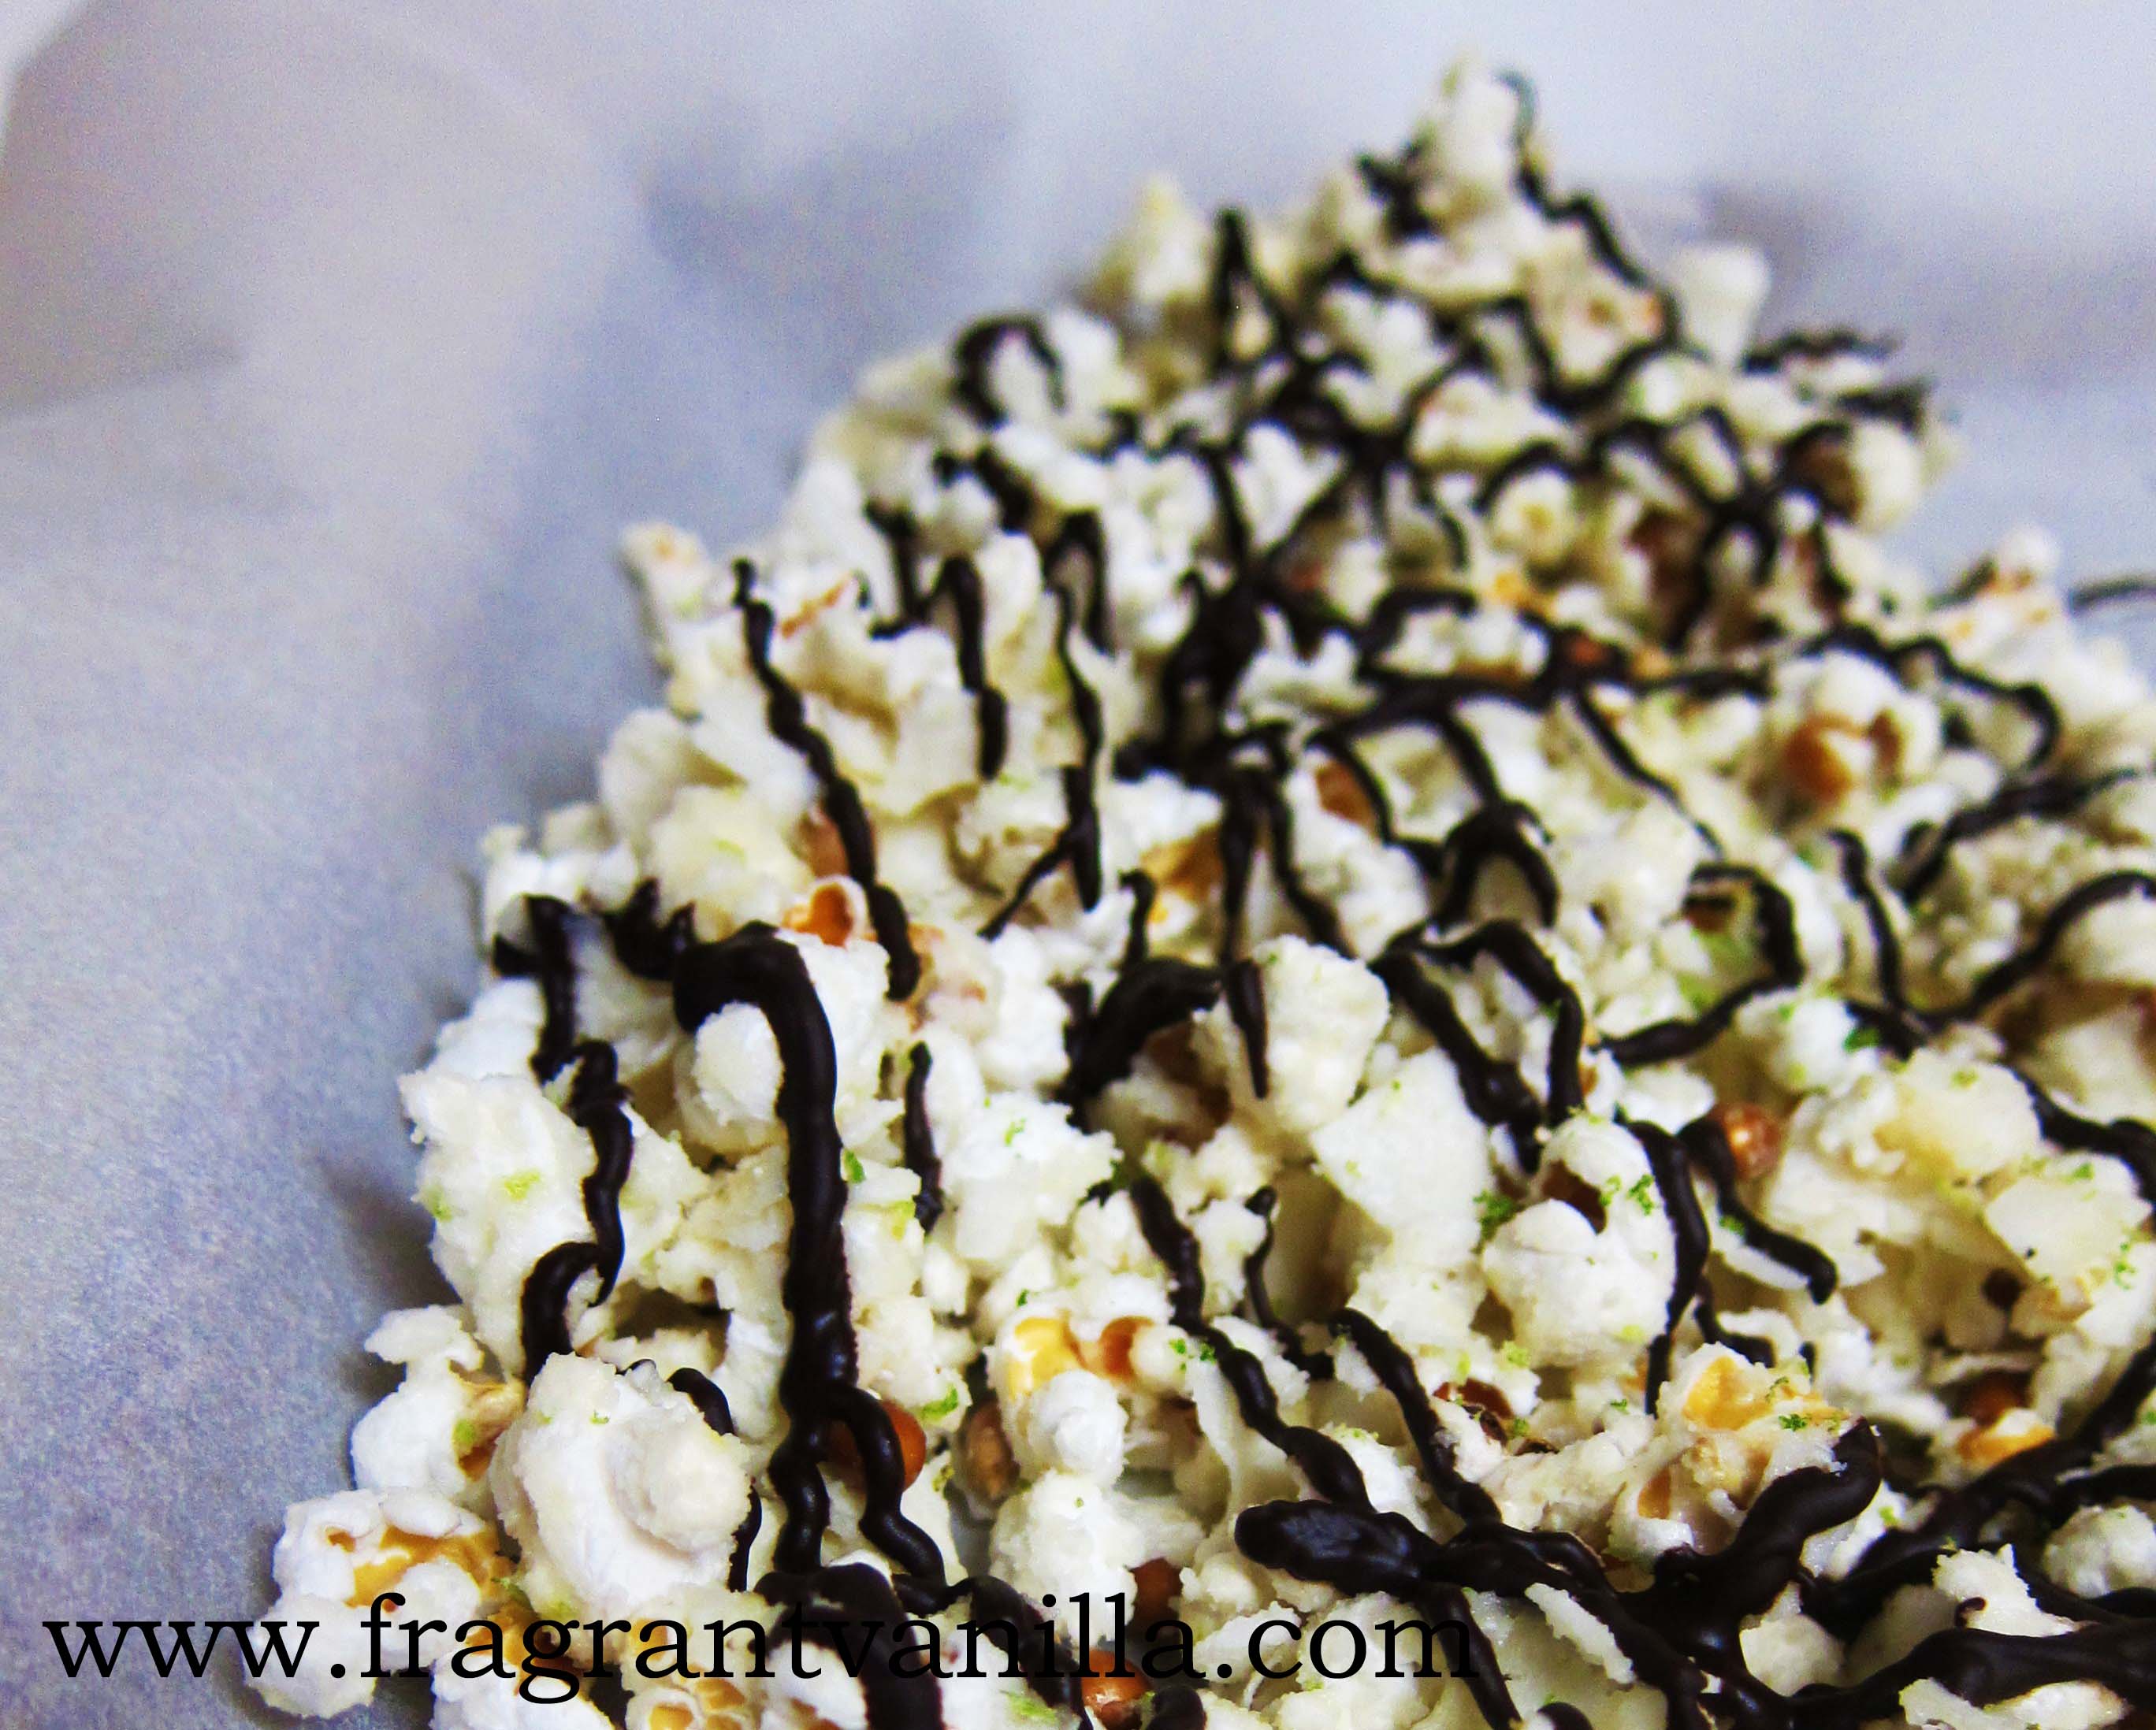 Coconut Lime Popcorn with Dark Chocolate Drizzle